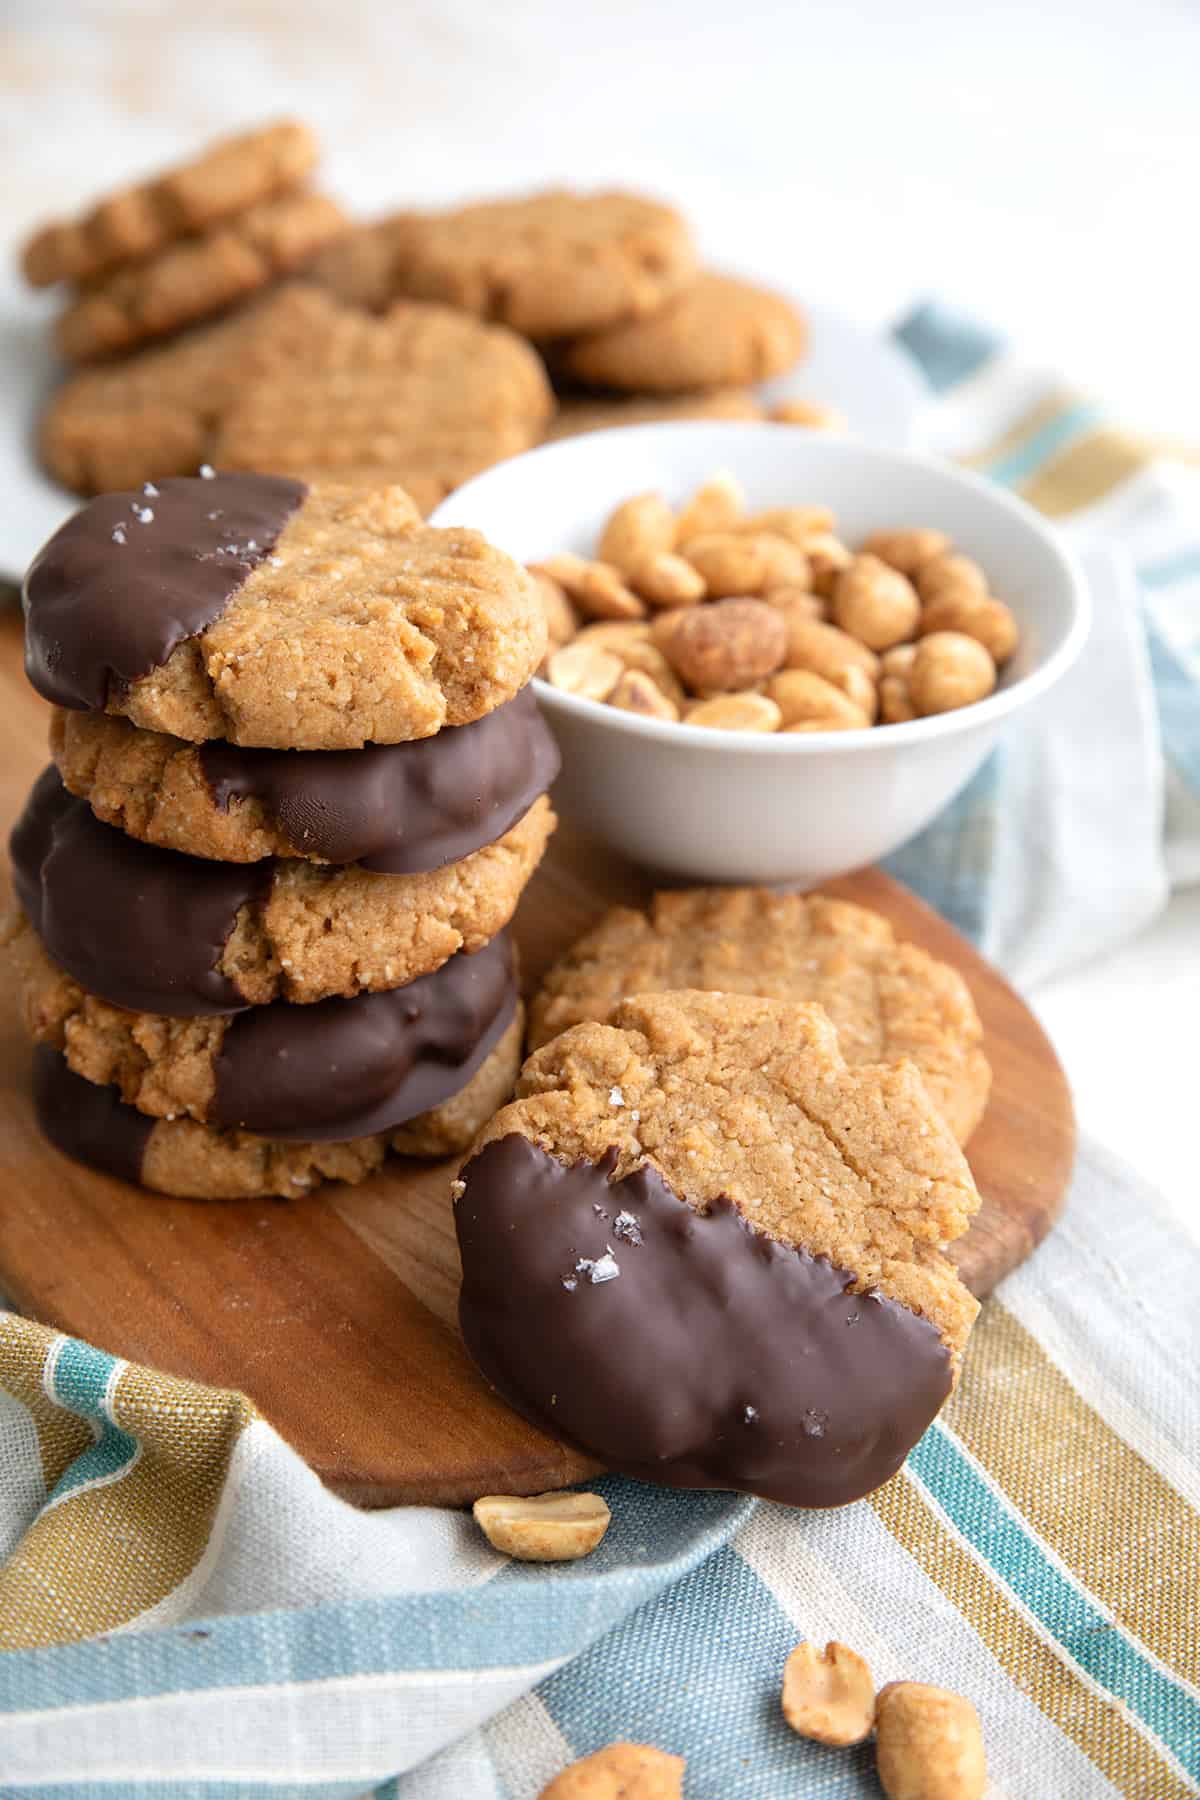 Chocolate Dipped Keto Peanut Butter Cookies on a small cutting board over a striped napkin.